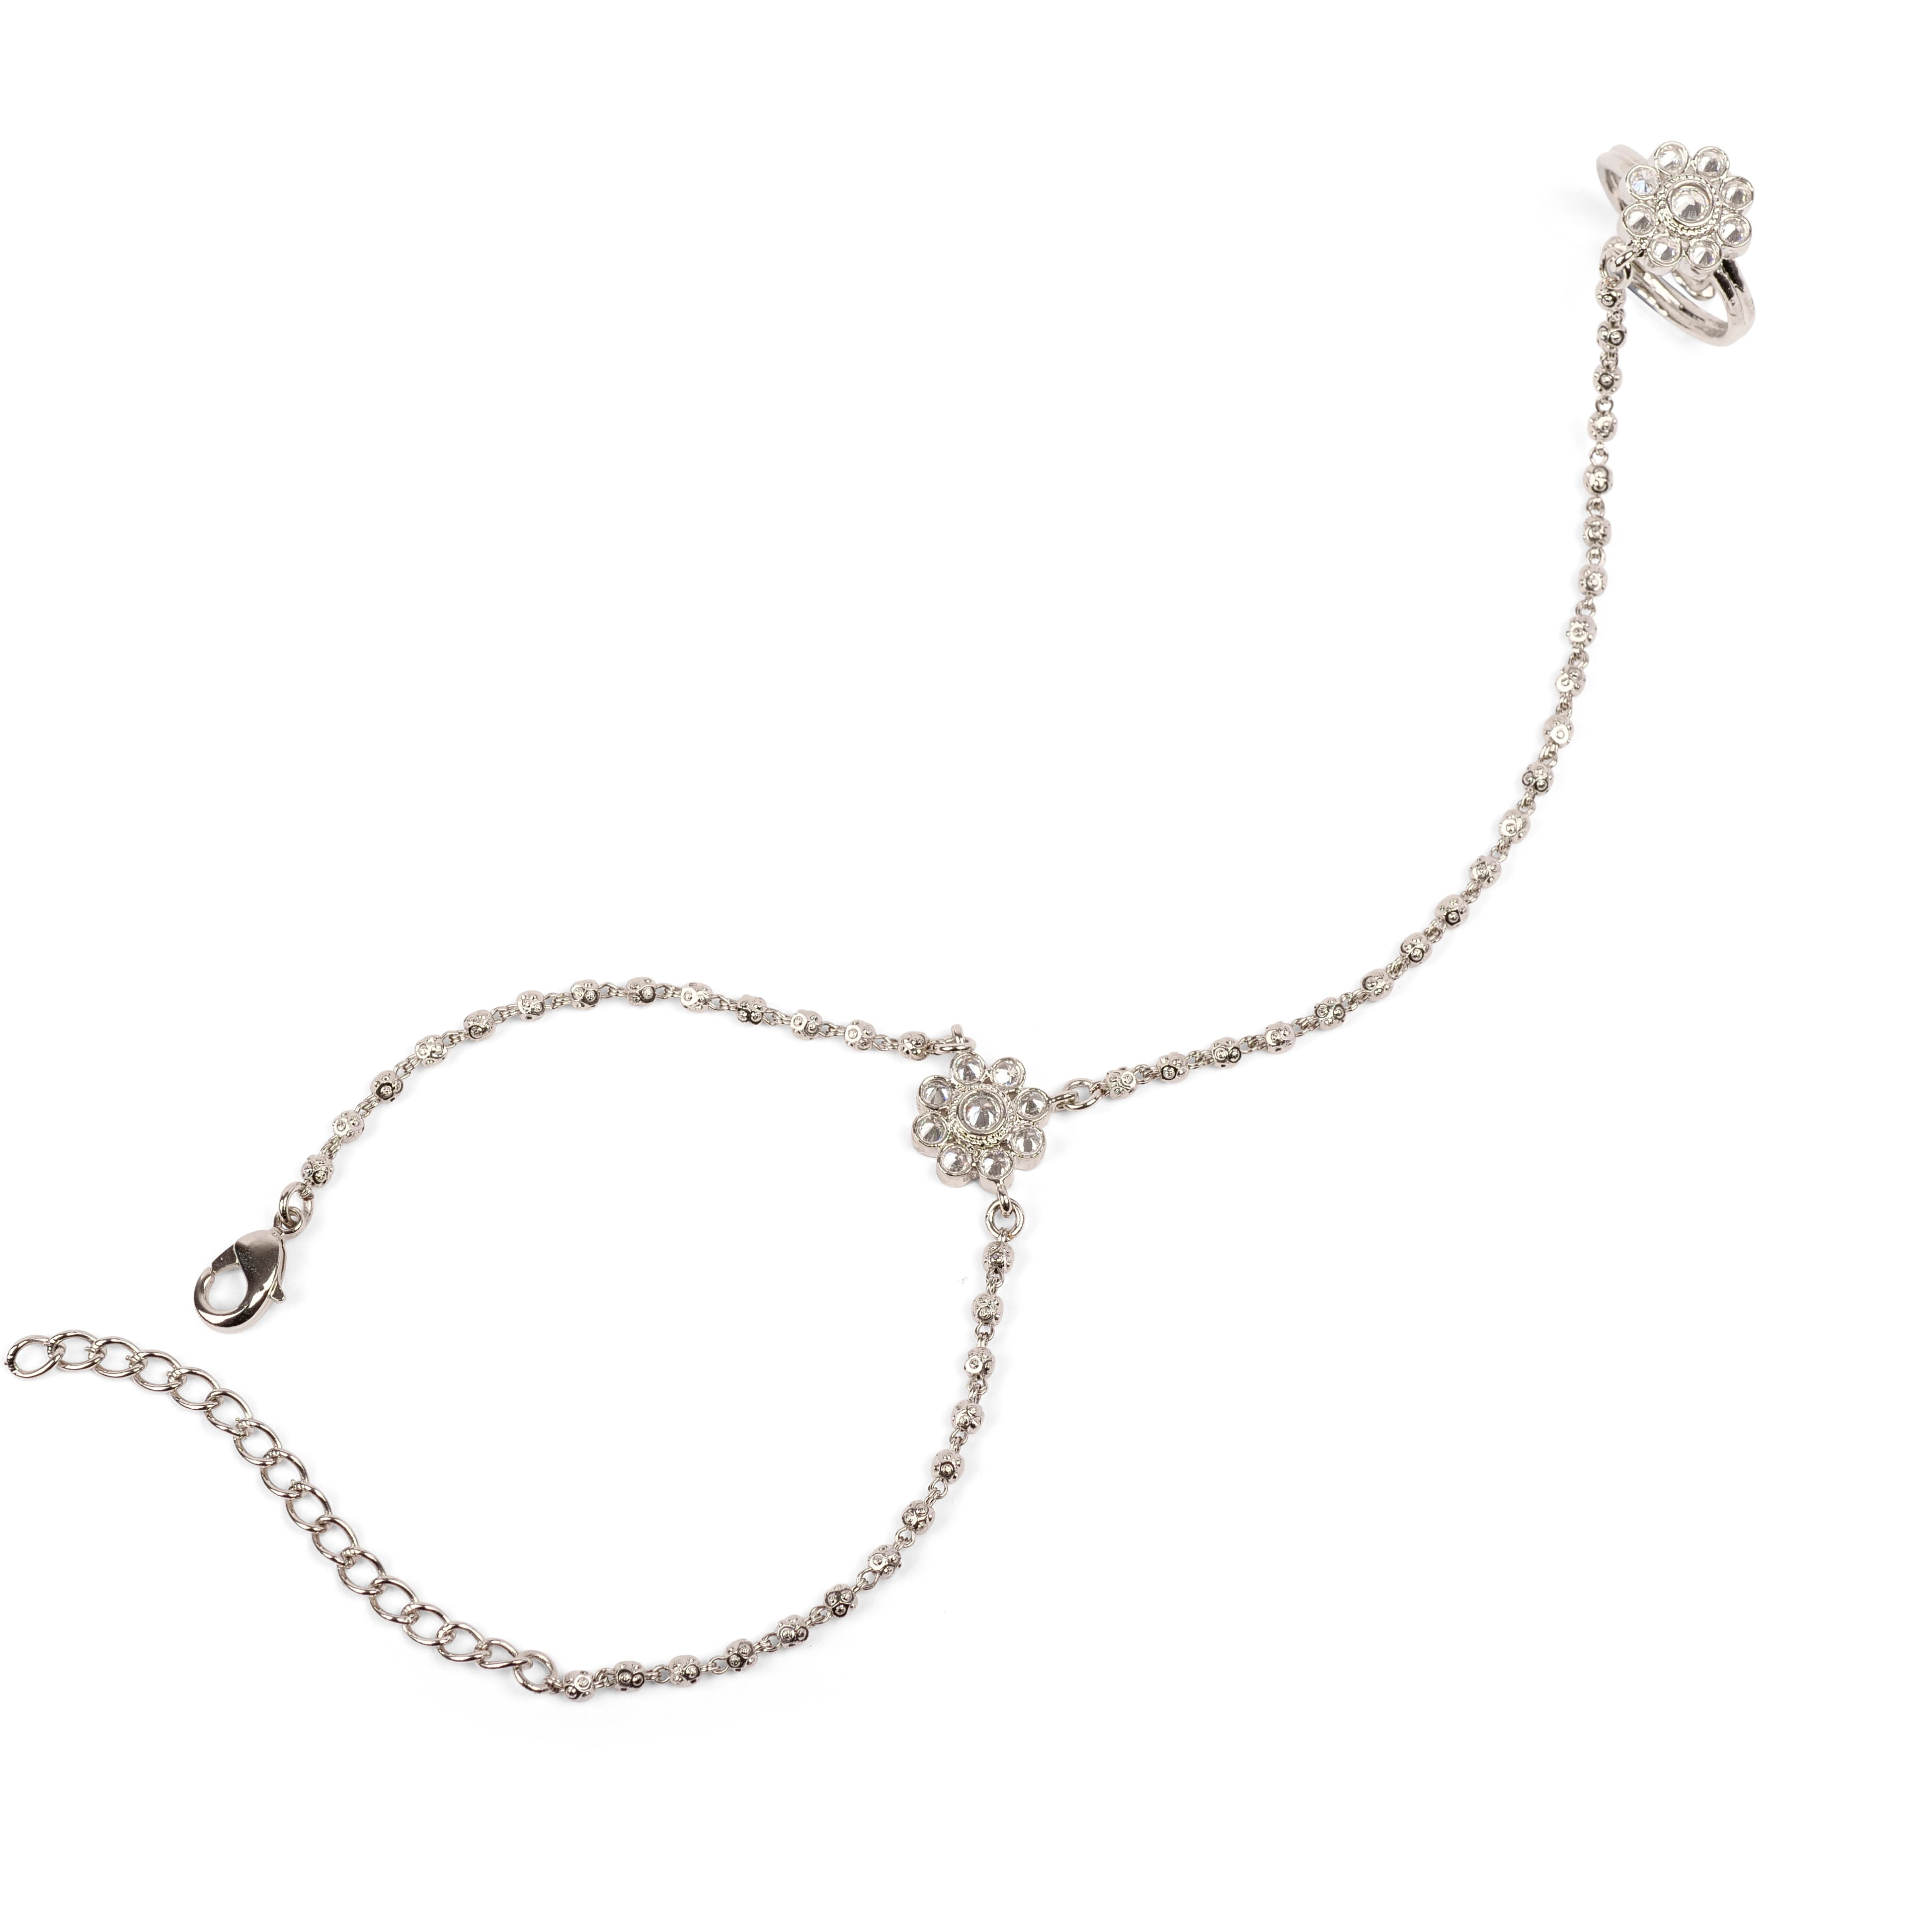 Forever Floral Hand Chain in Rhodium